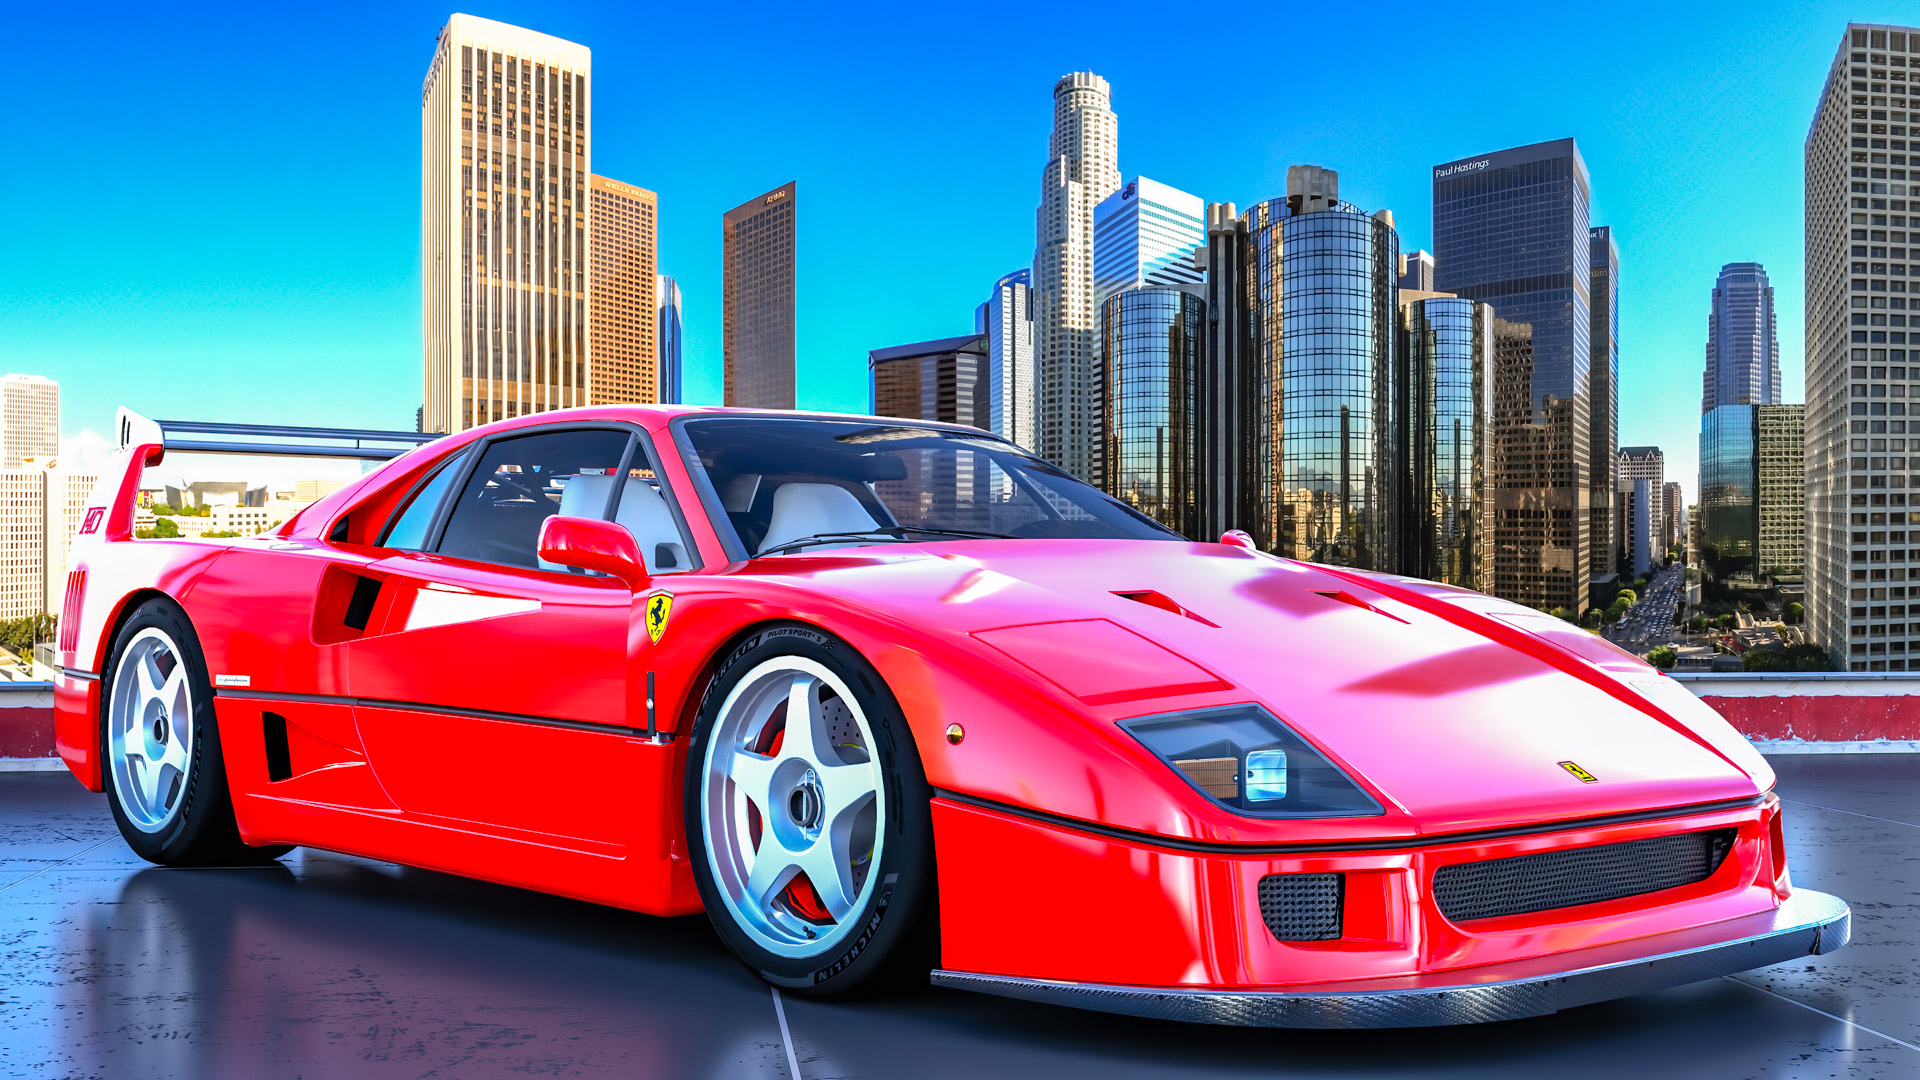 Travel back in time with our old car wallpaper showcasing the iconic Ferrari F40, a testament to the golden era of motor racing.